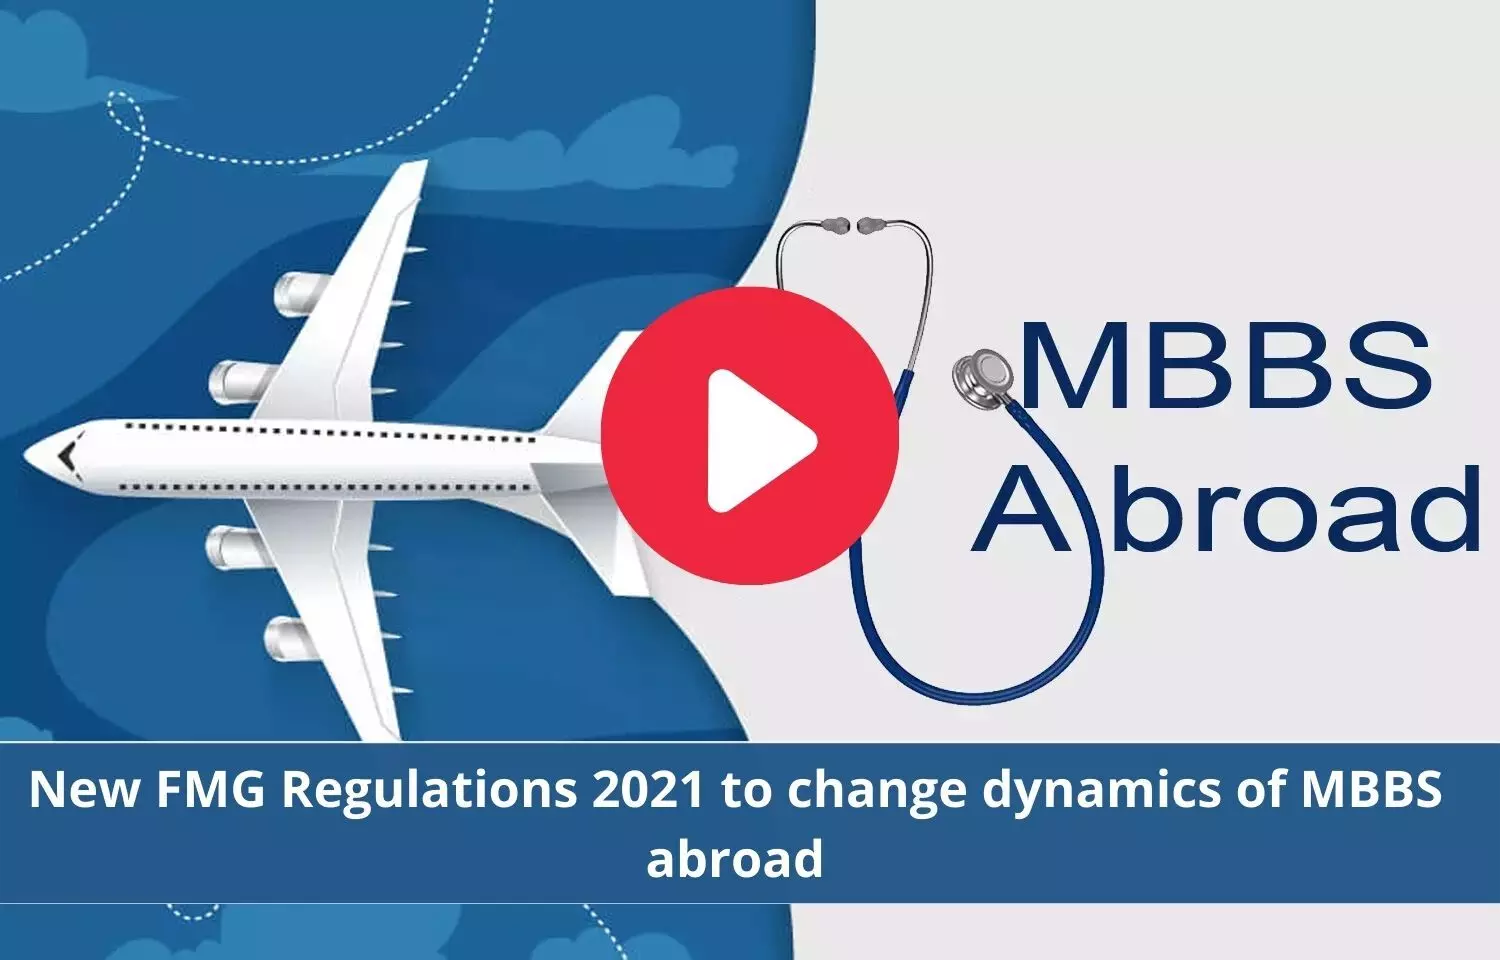 New FMG Regulations 2021 and their implications on MBBS abroad